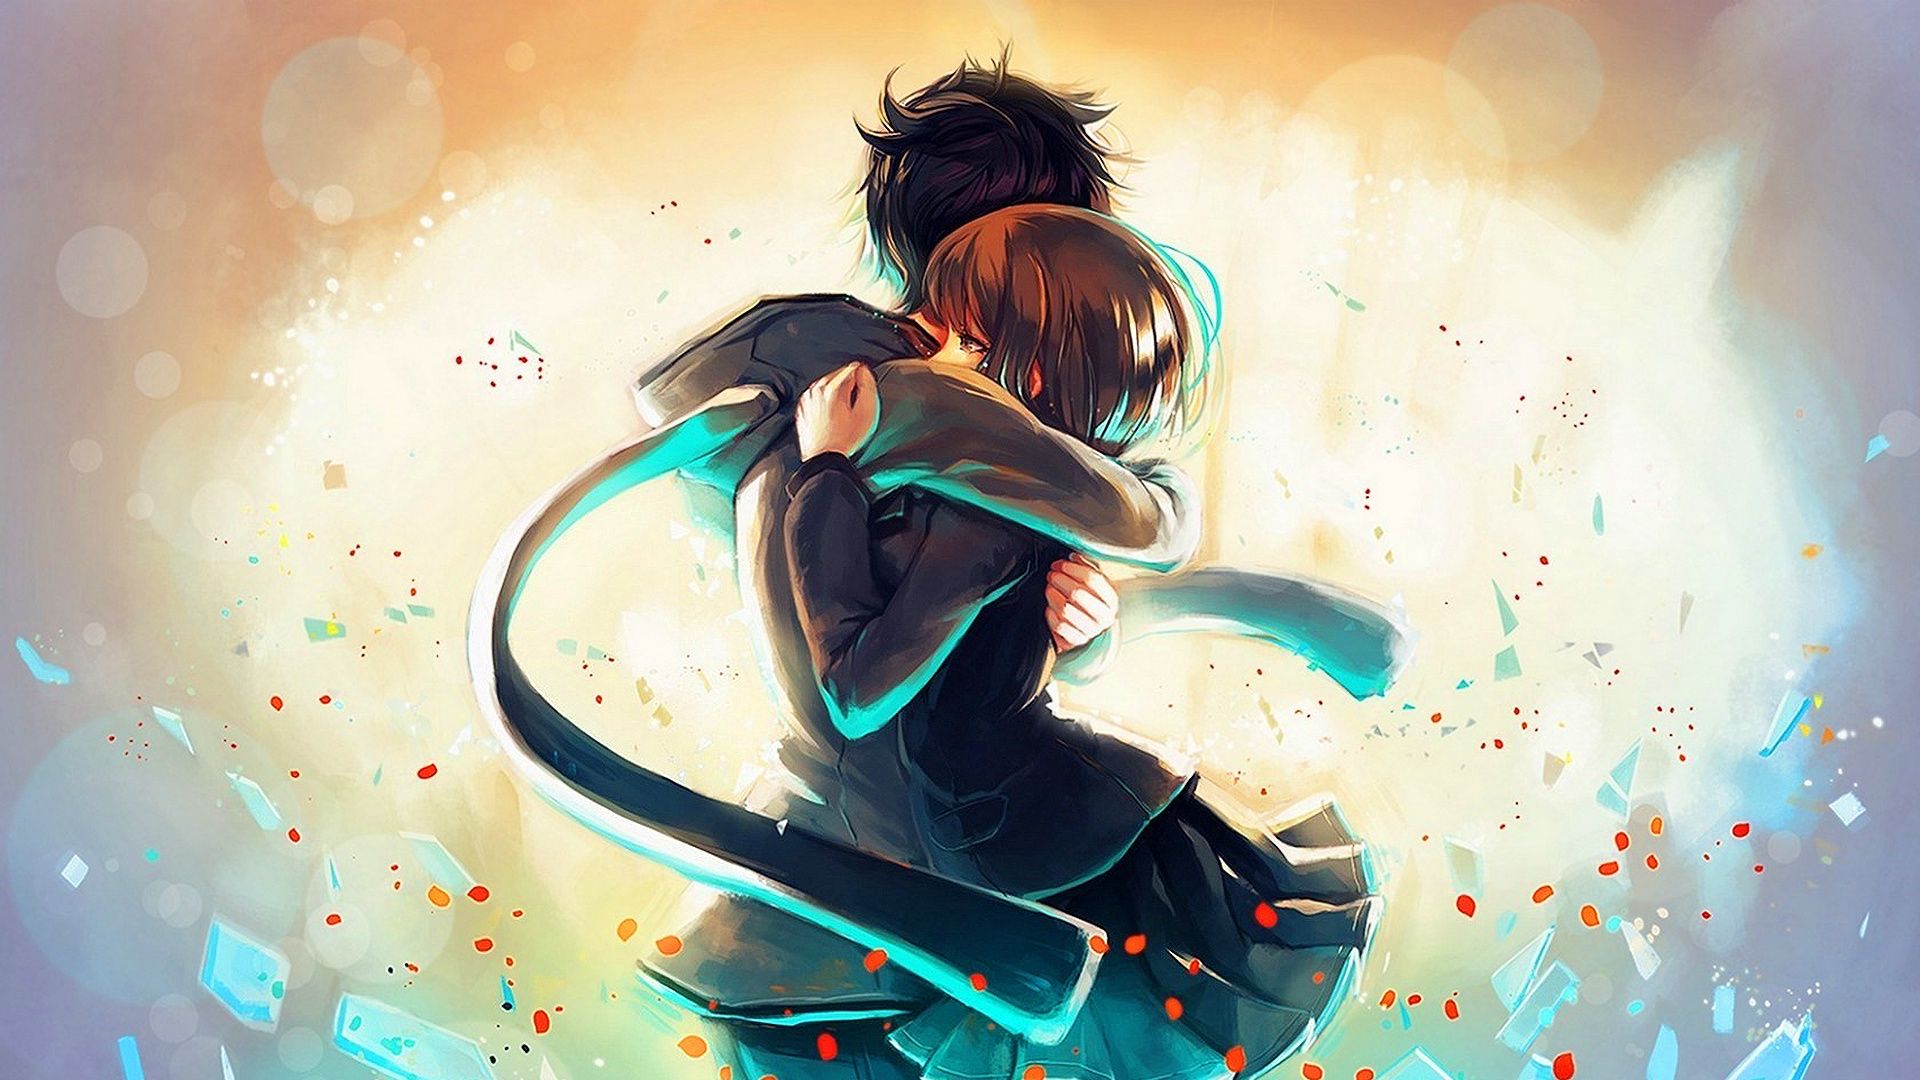 I wish I could hold you closer Love Hd anime wallpapers